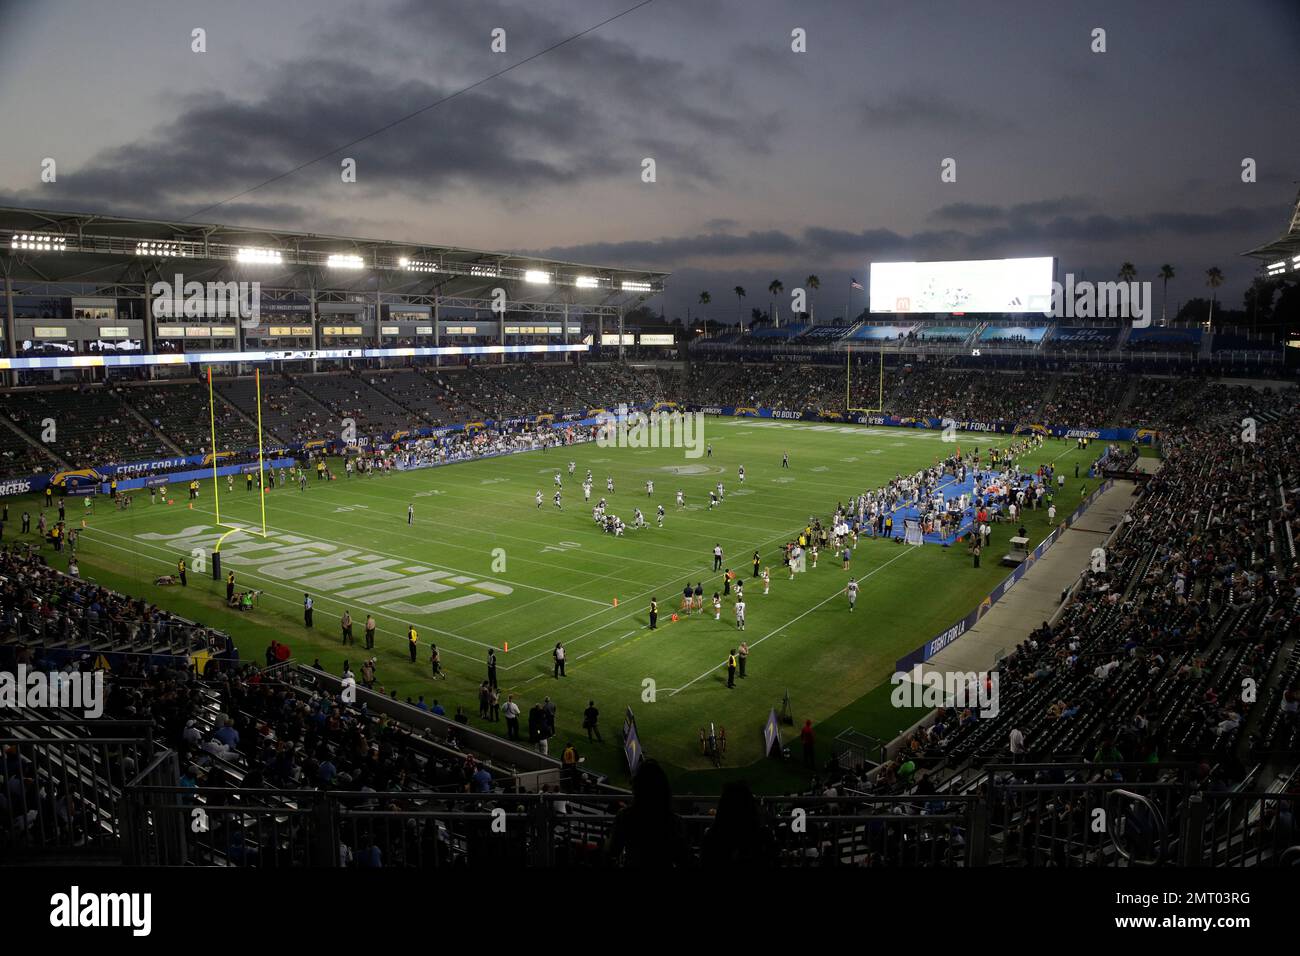 The Los Angeles Chargers play the Seattle Seahawks at StubHub